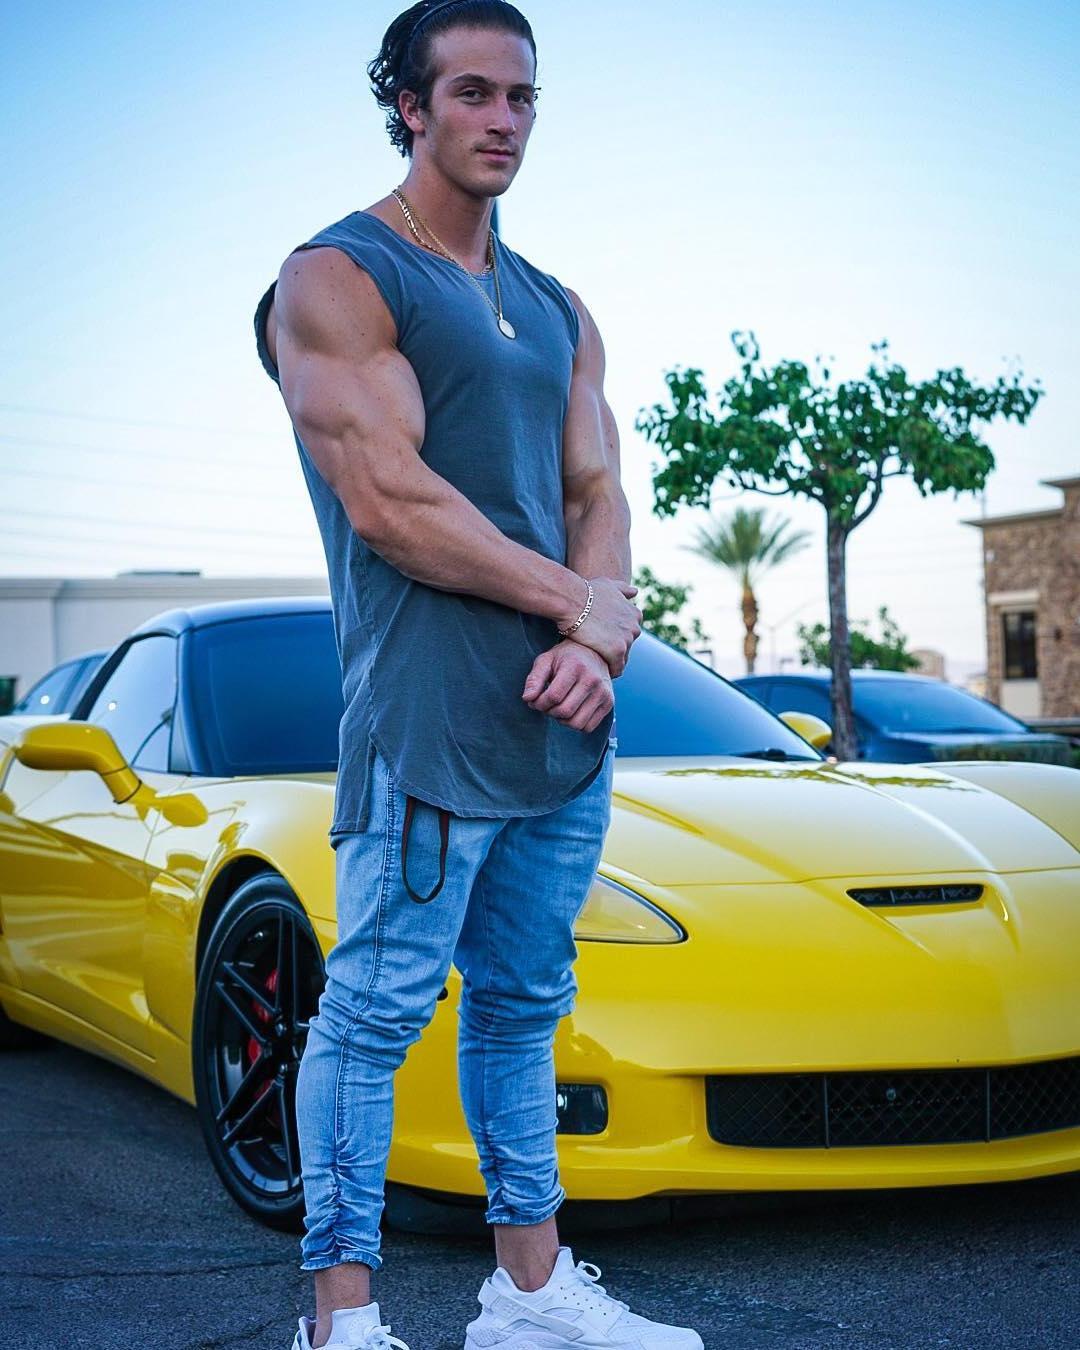 strong-young-bodybuilder-brandon-anthony-flihan-sexy-fast-yellow-car